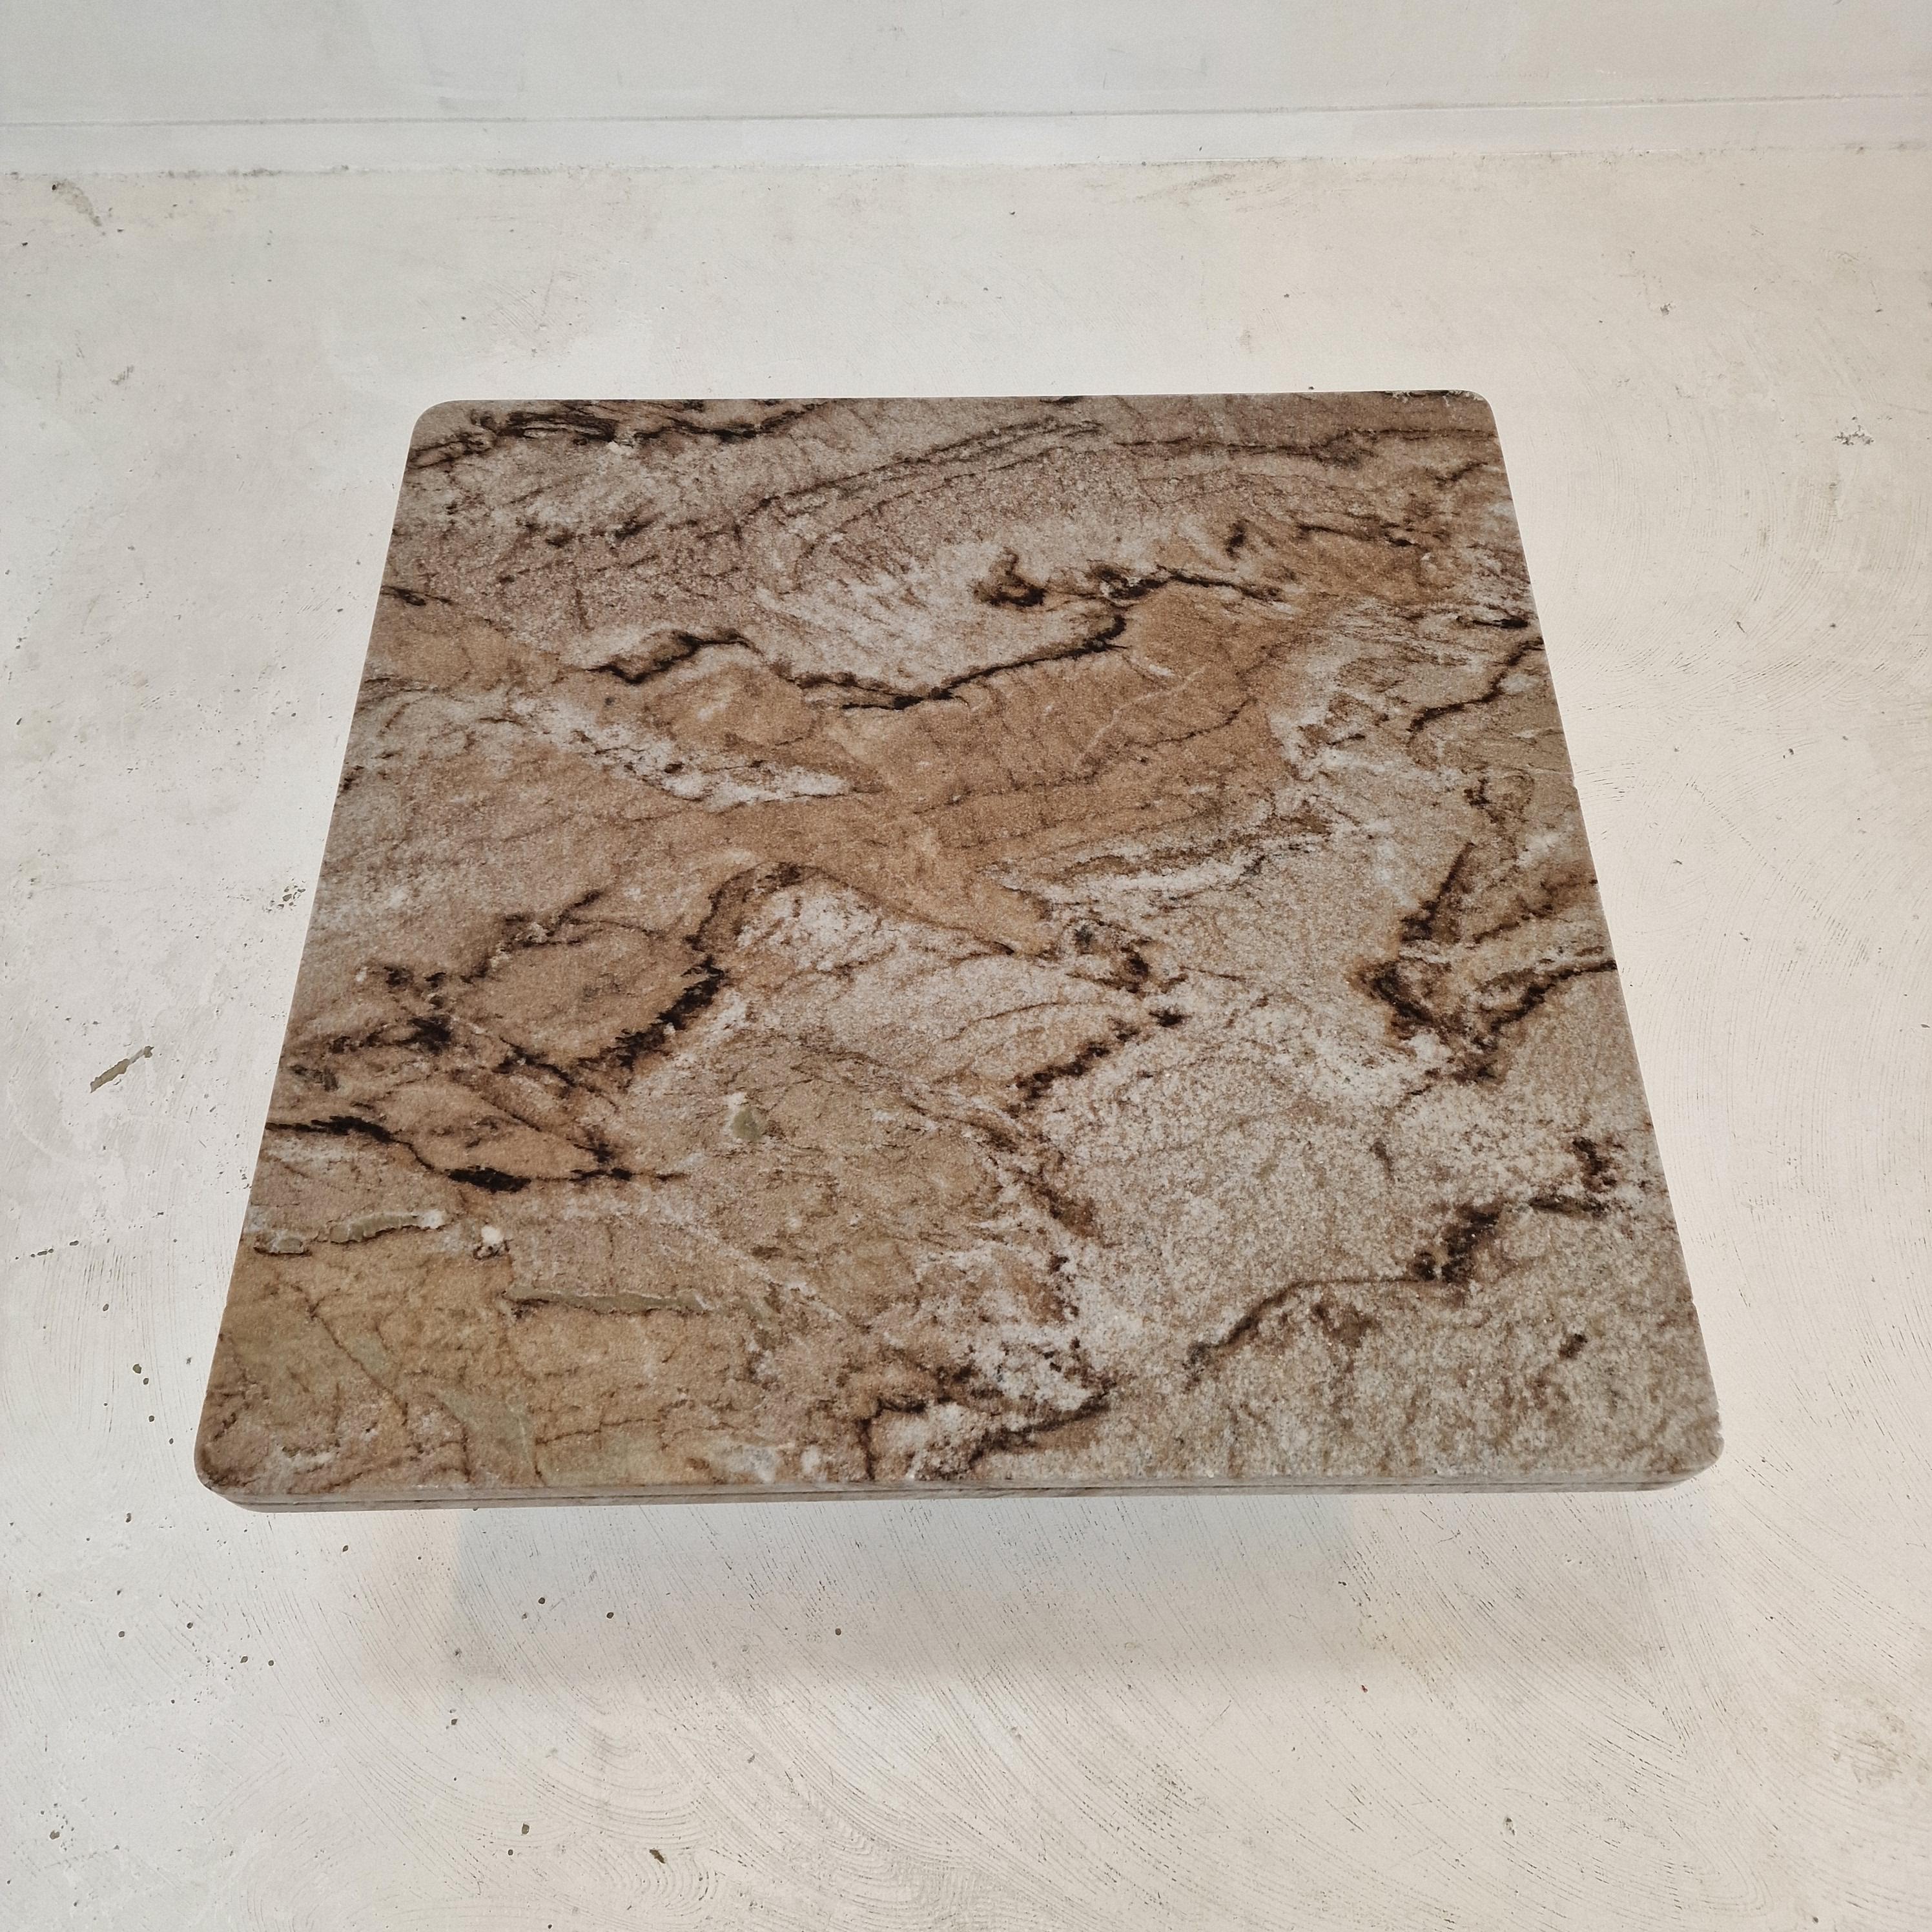 Italian Coffee or Side Table in Granite, 1980s For Sale 2